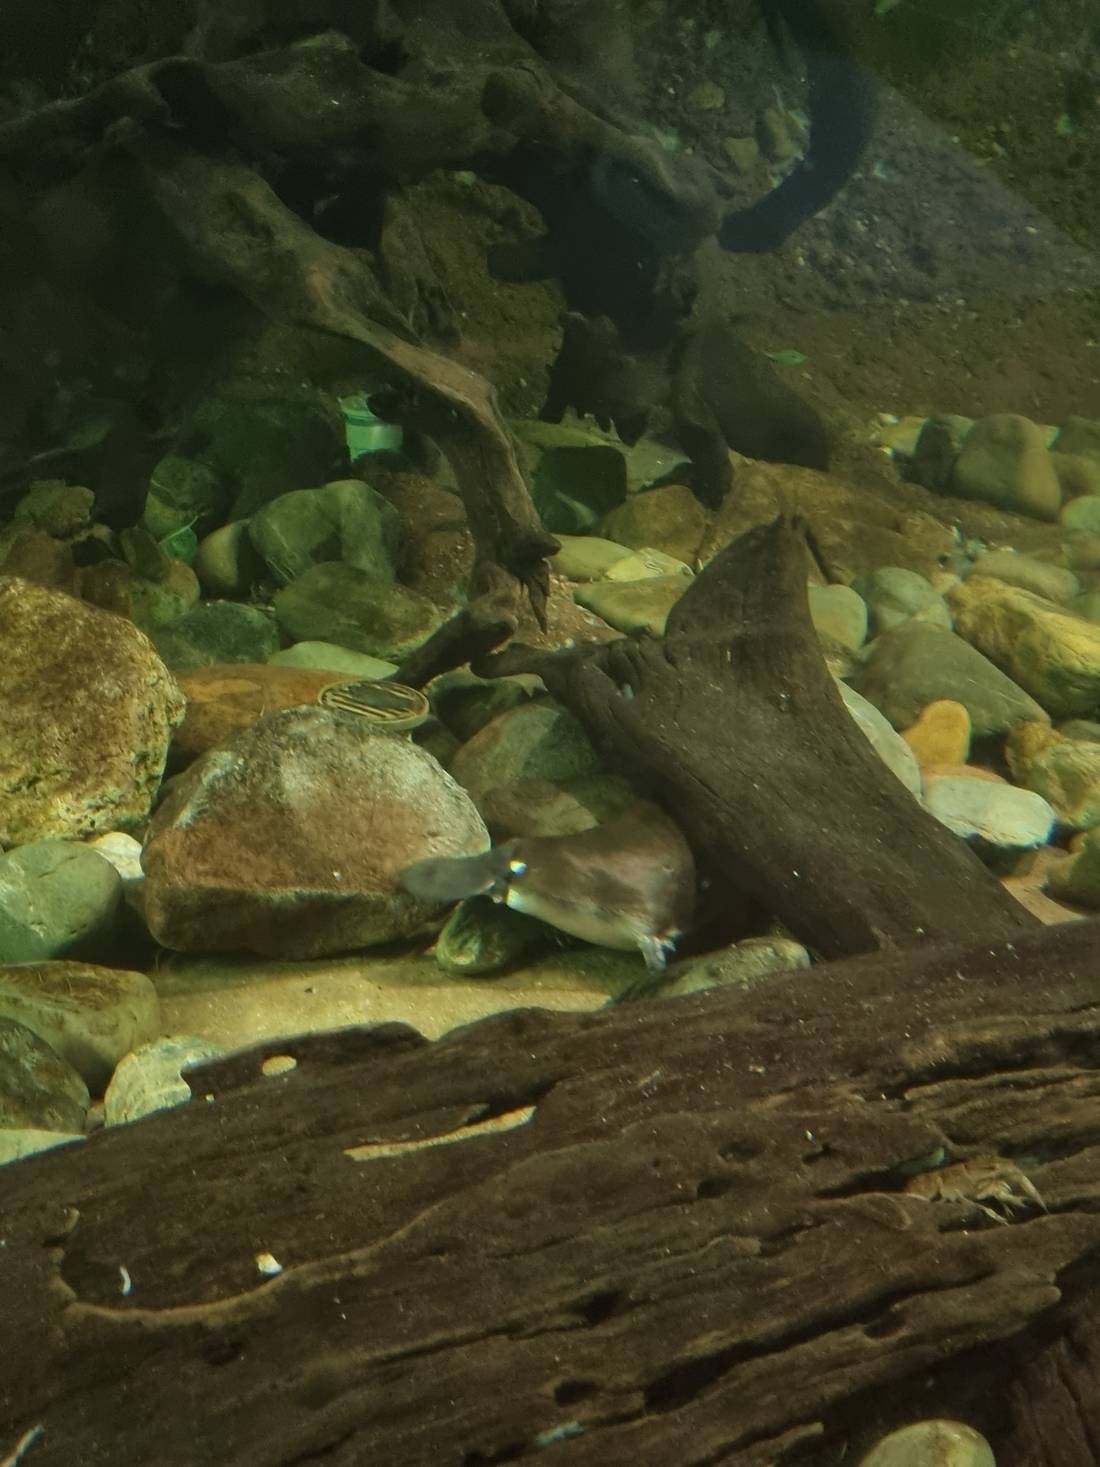 A Platypus! They are very (very) hard to spot in the wild and almost as hard to photograph in a tank. This one is hiding under the tree branch (centre, lower part of photo).